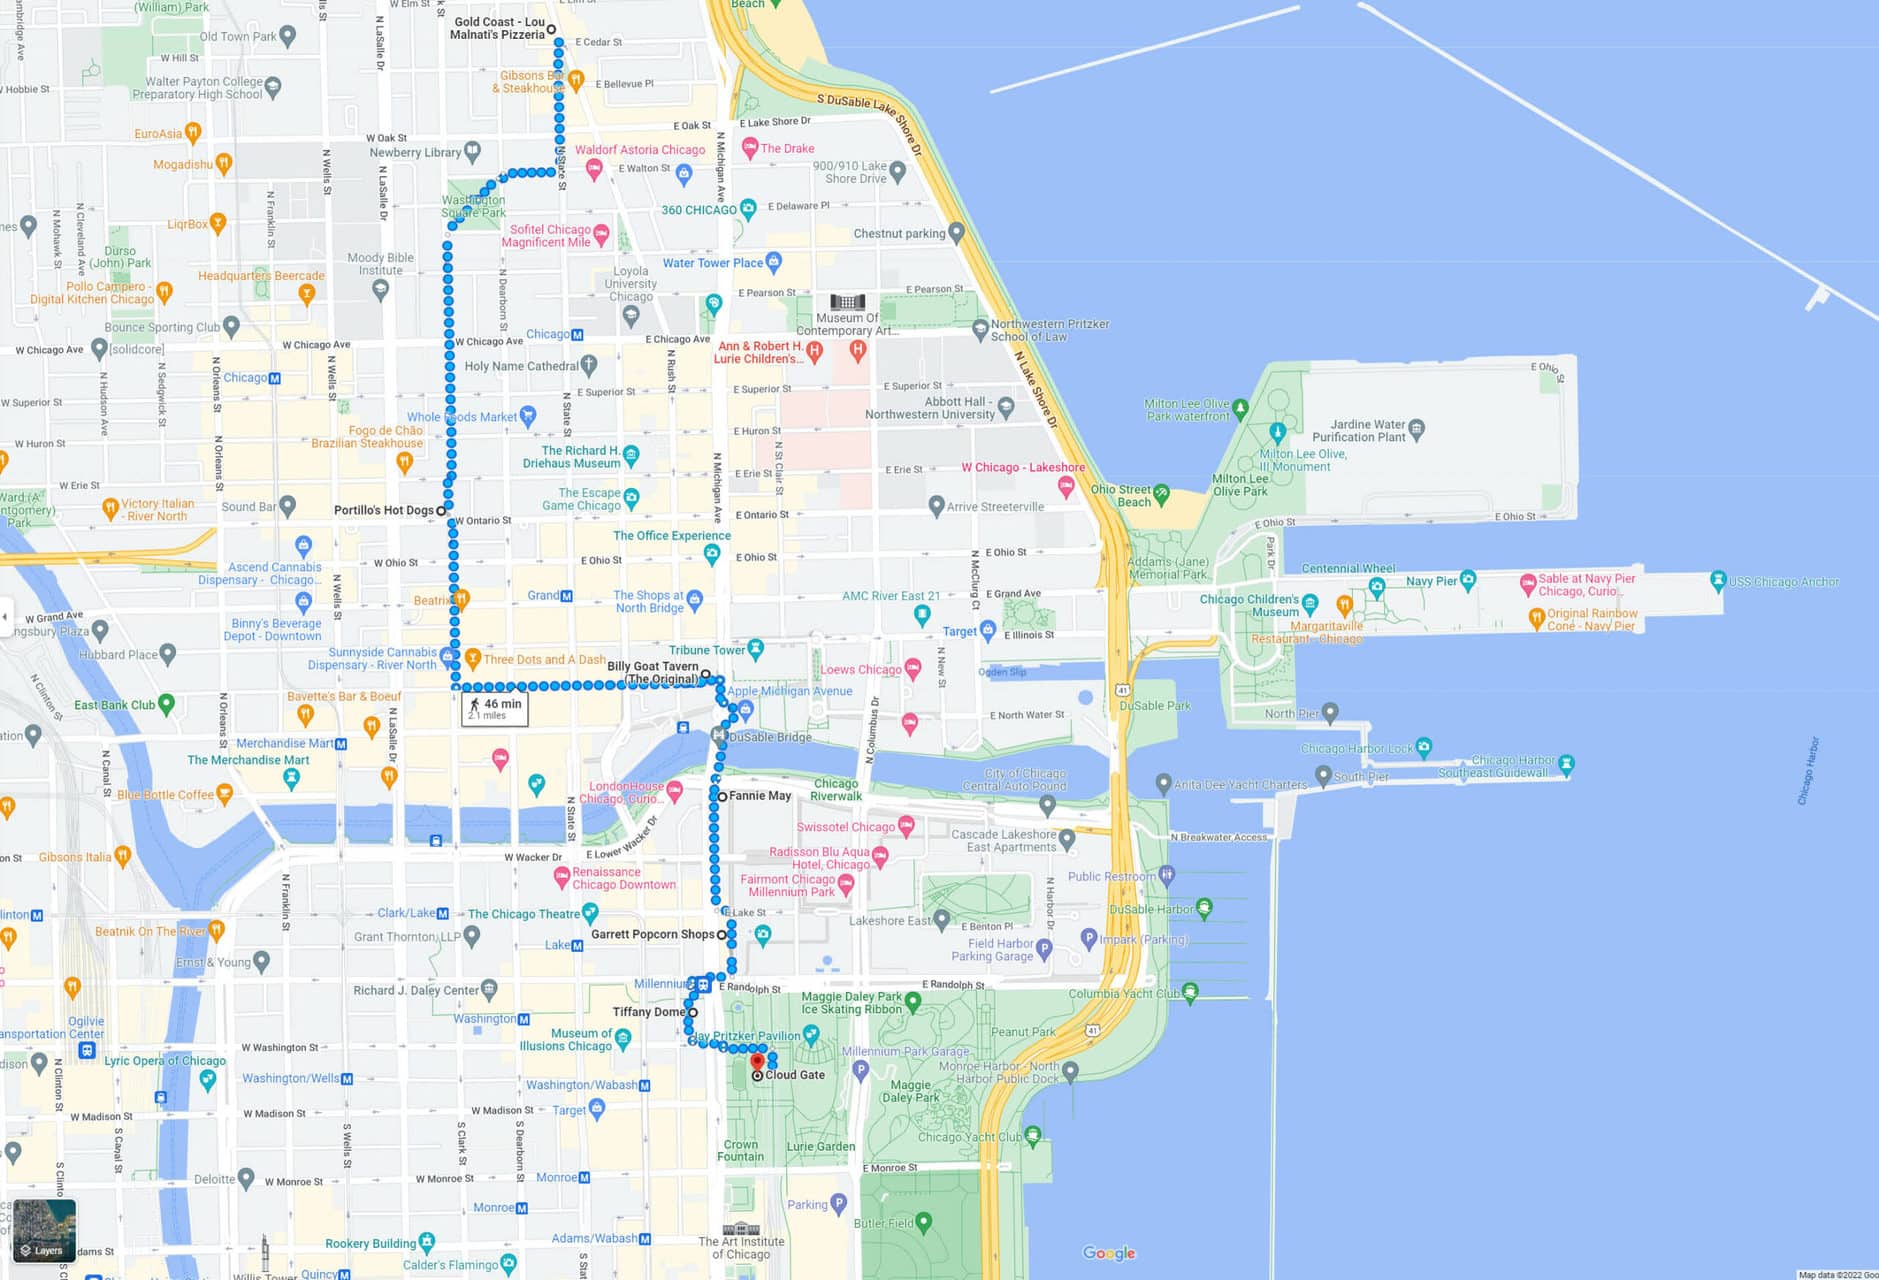 Chicago Food Tour Map without Navy Pier